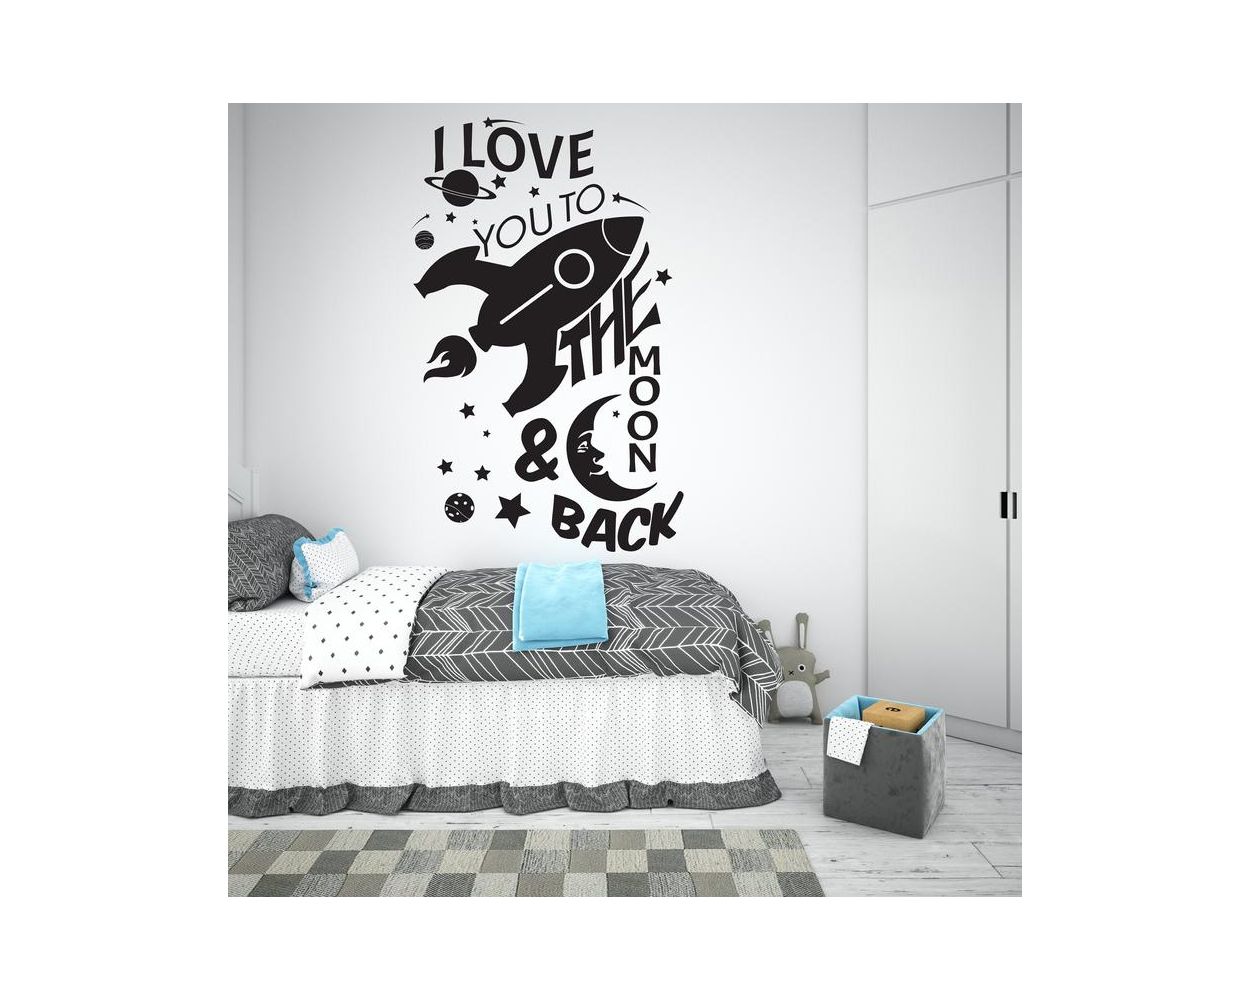 We Love You to the Moon and Back Kids Wall Decals Vinyl Stickers